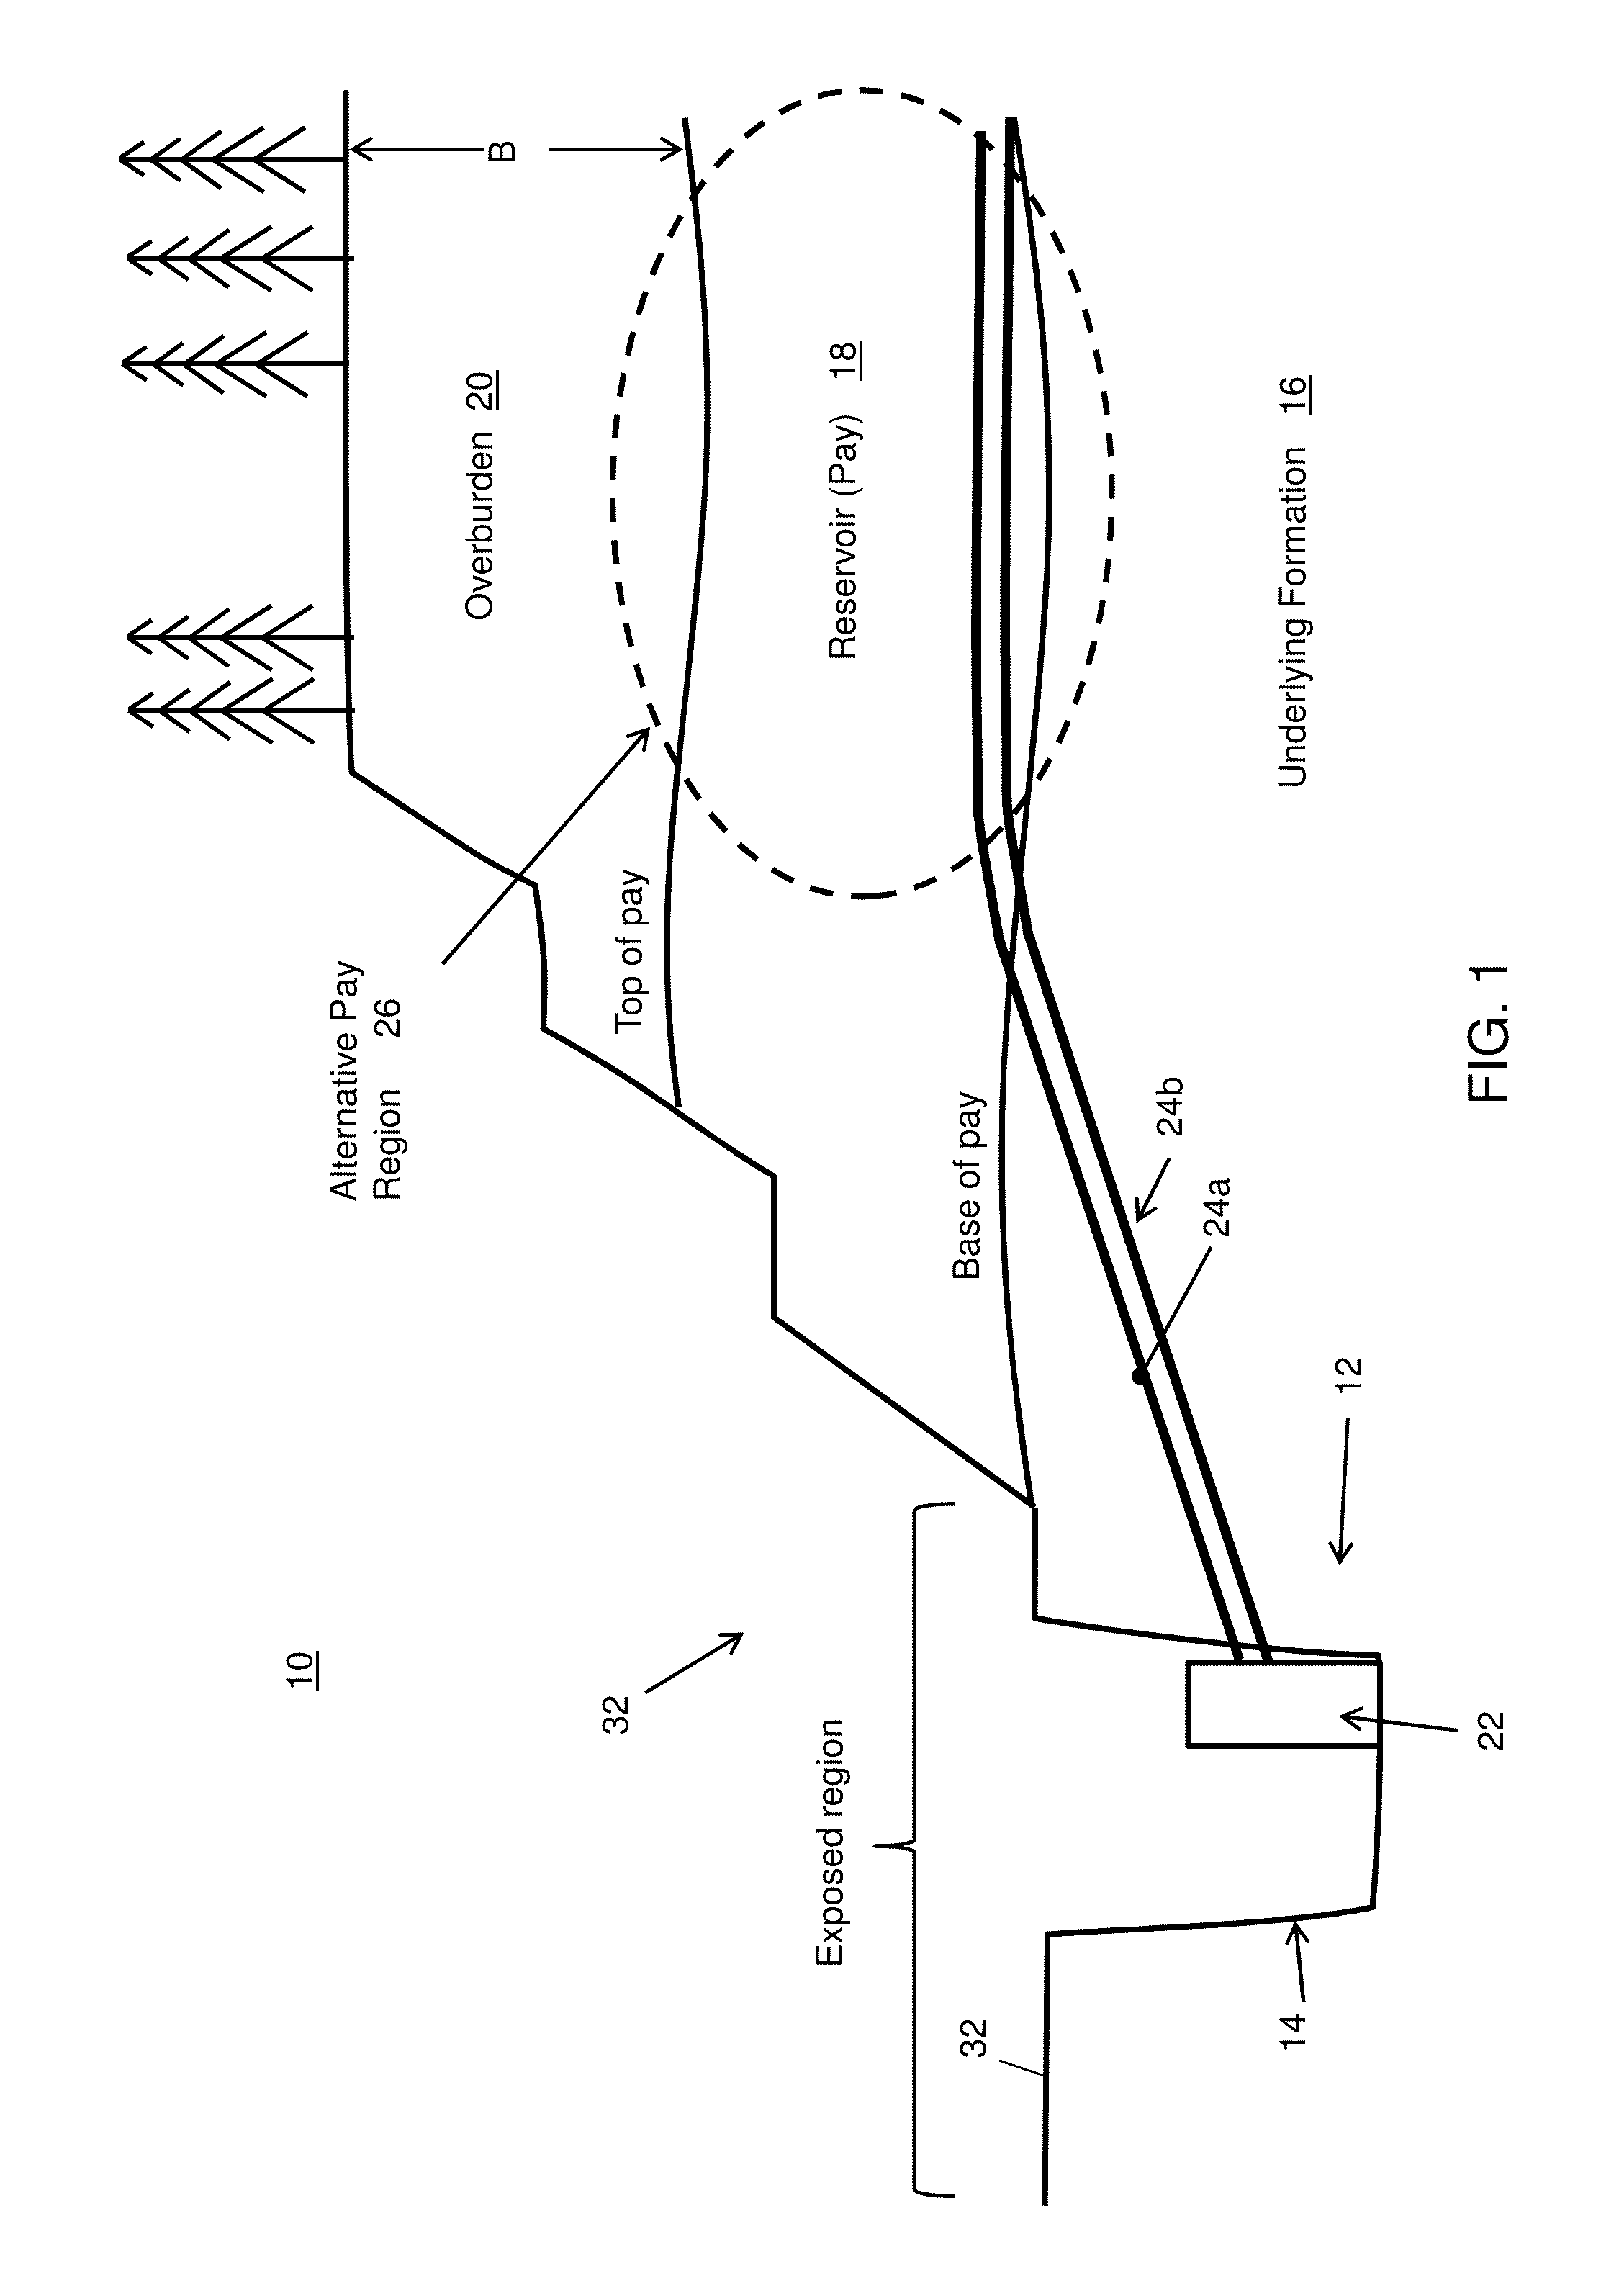 In situ gravity drainage system and method for extracting bitumen from alternative pay regions